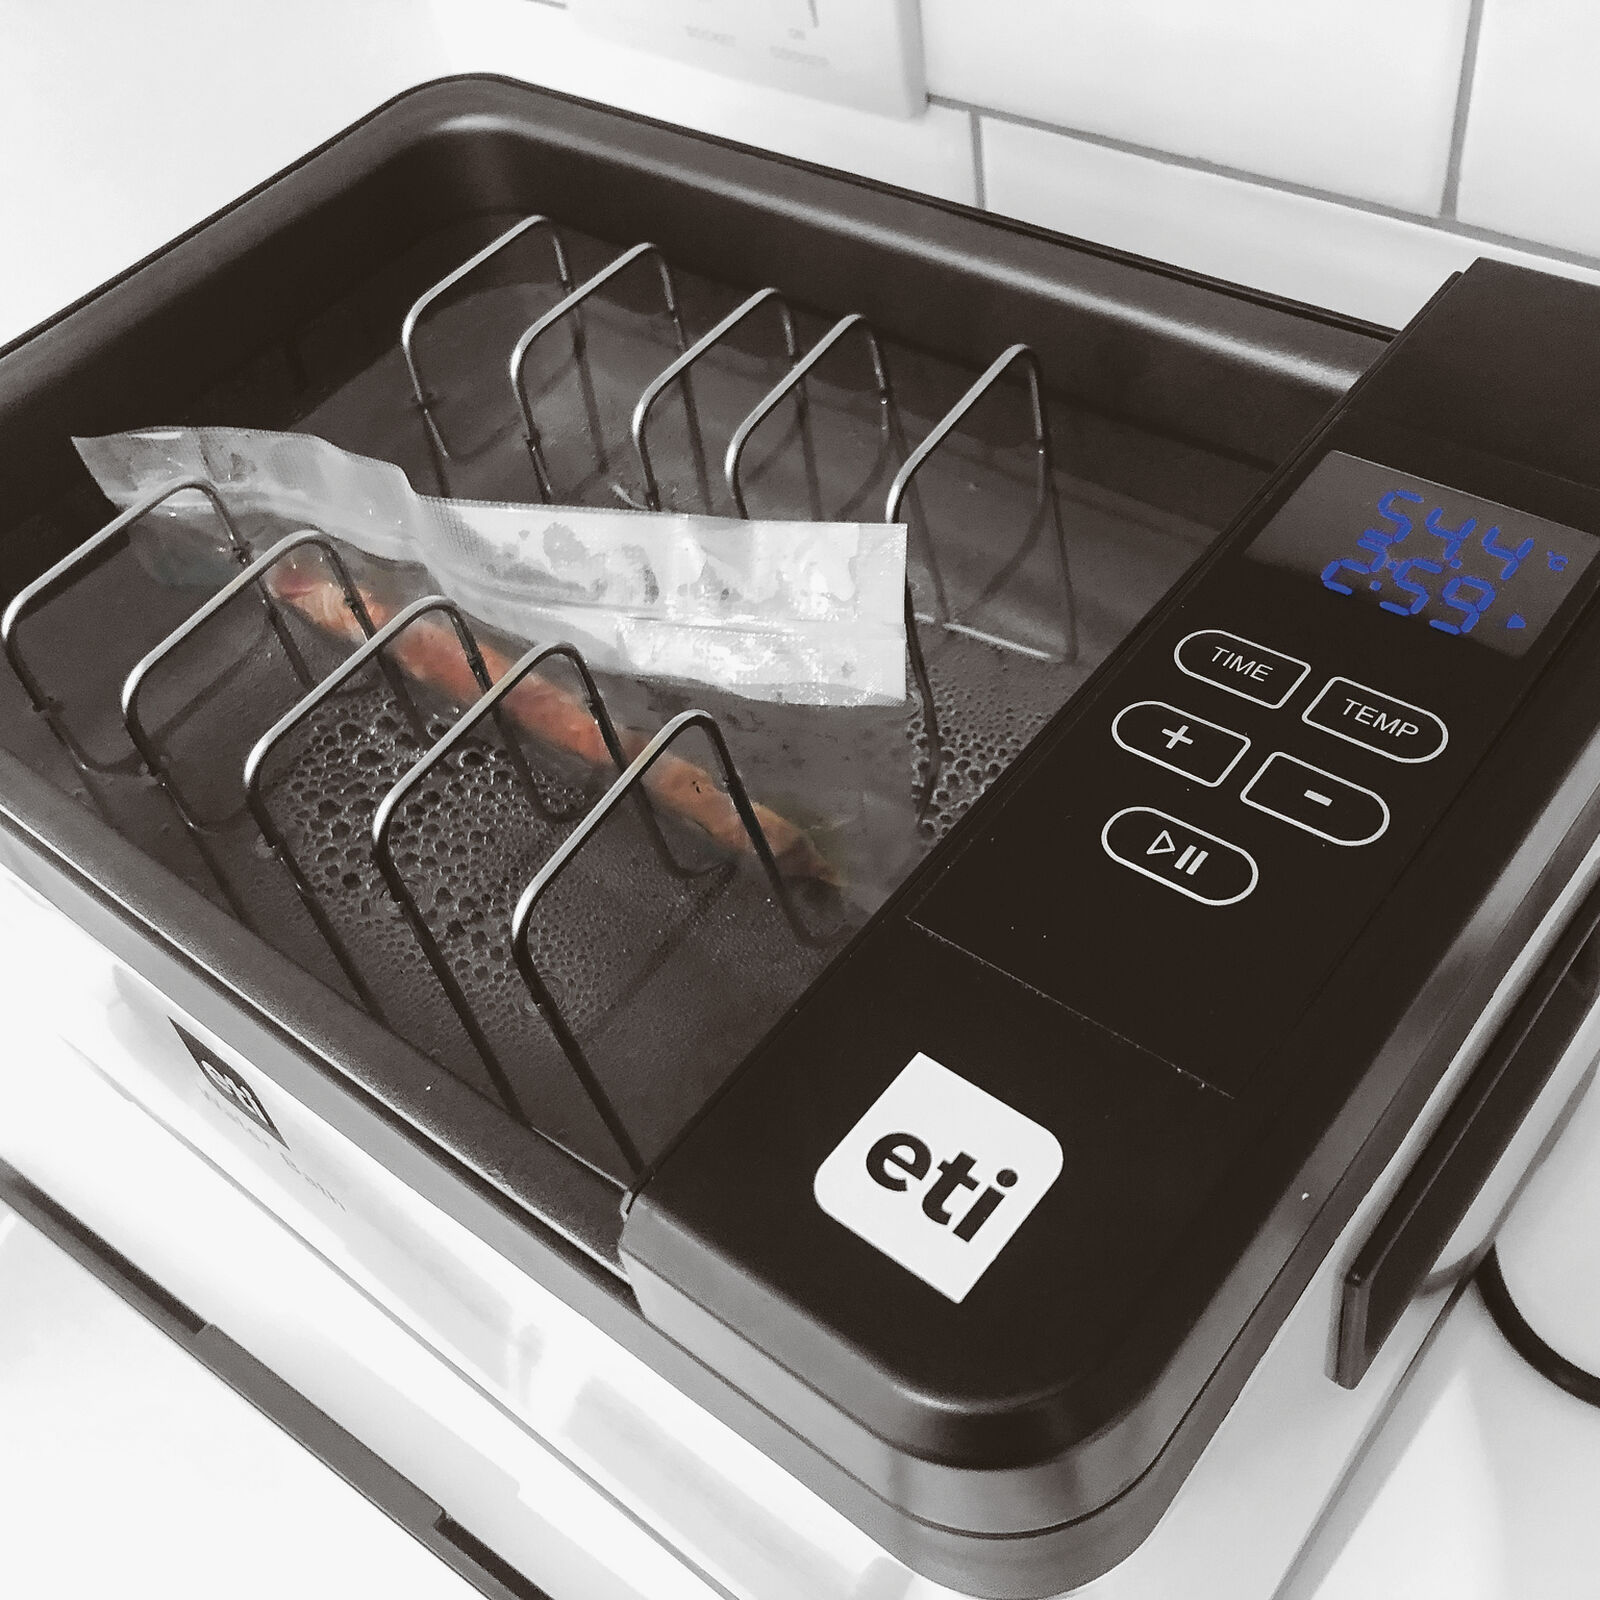 Sous-vide cooking device